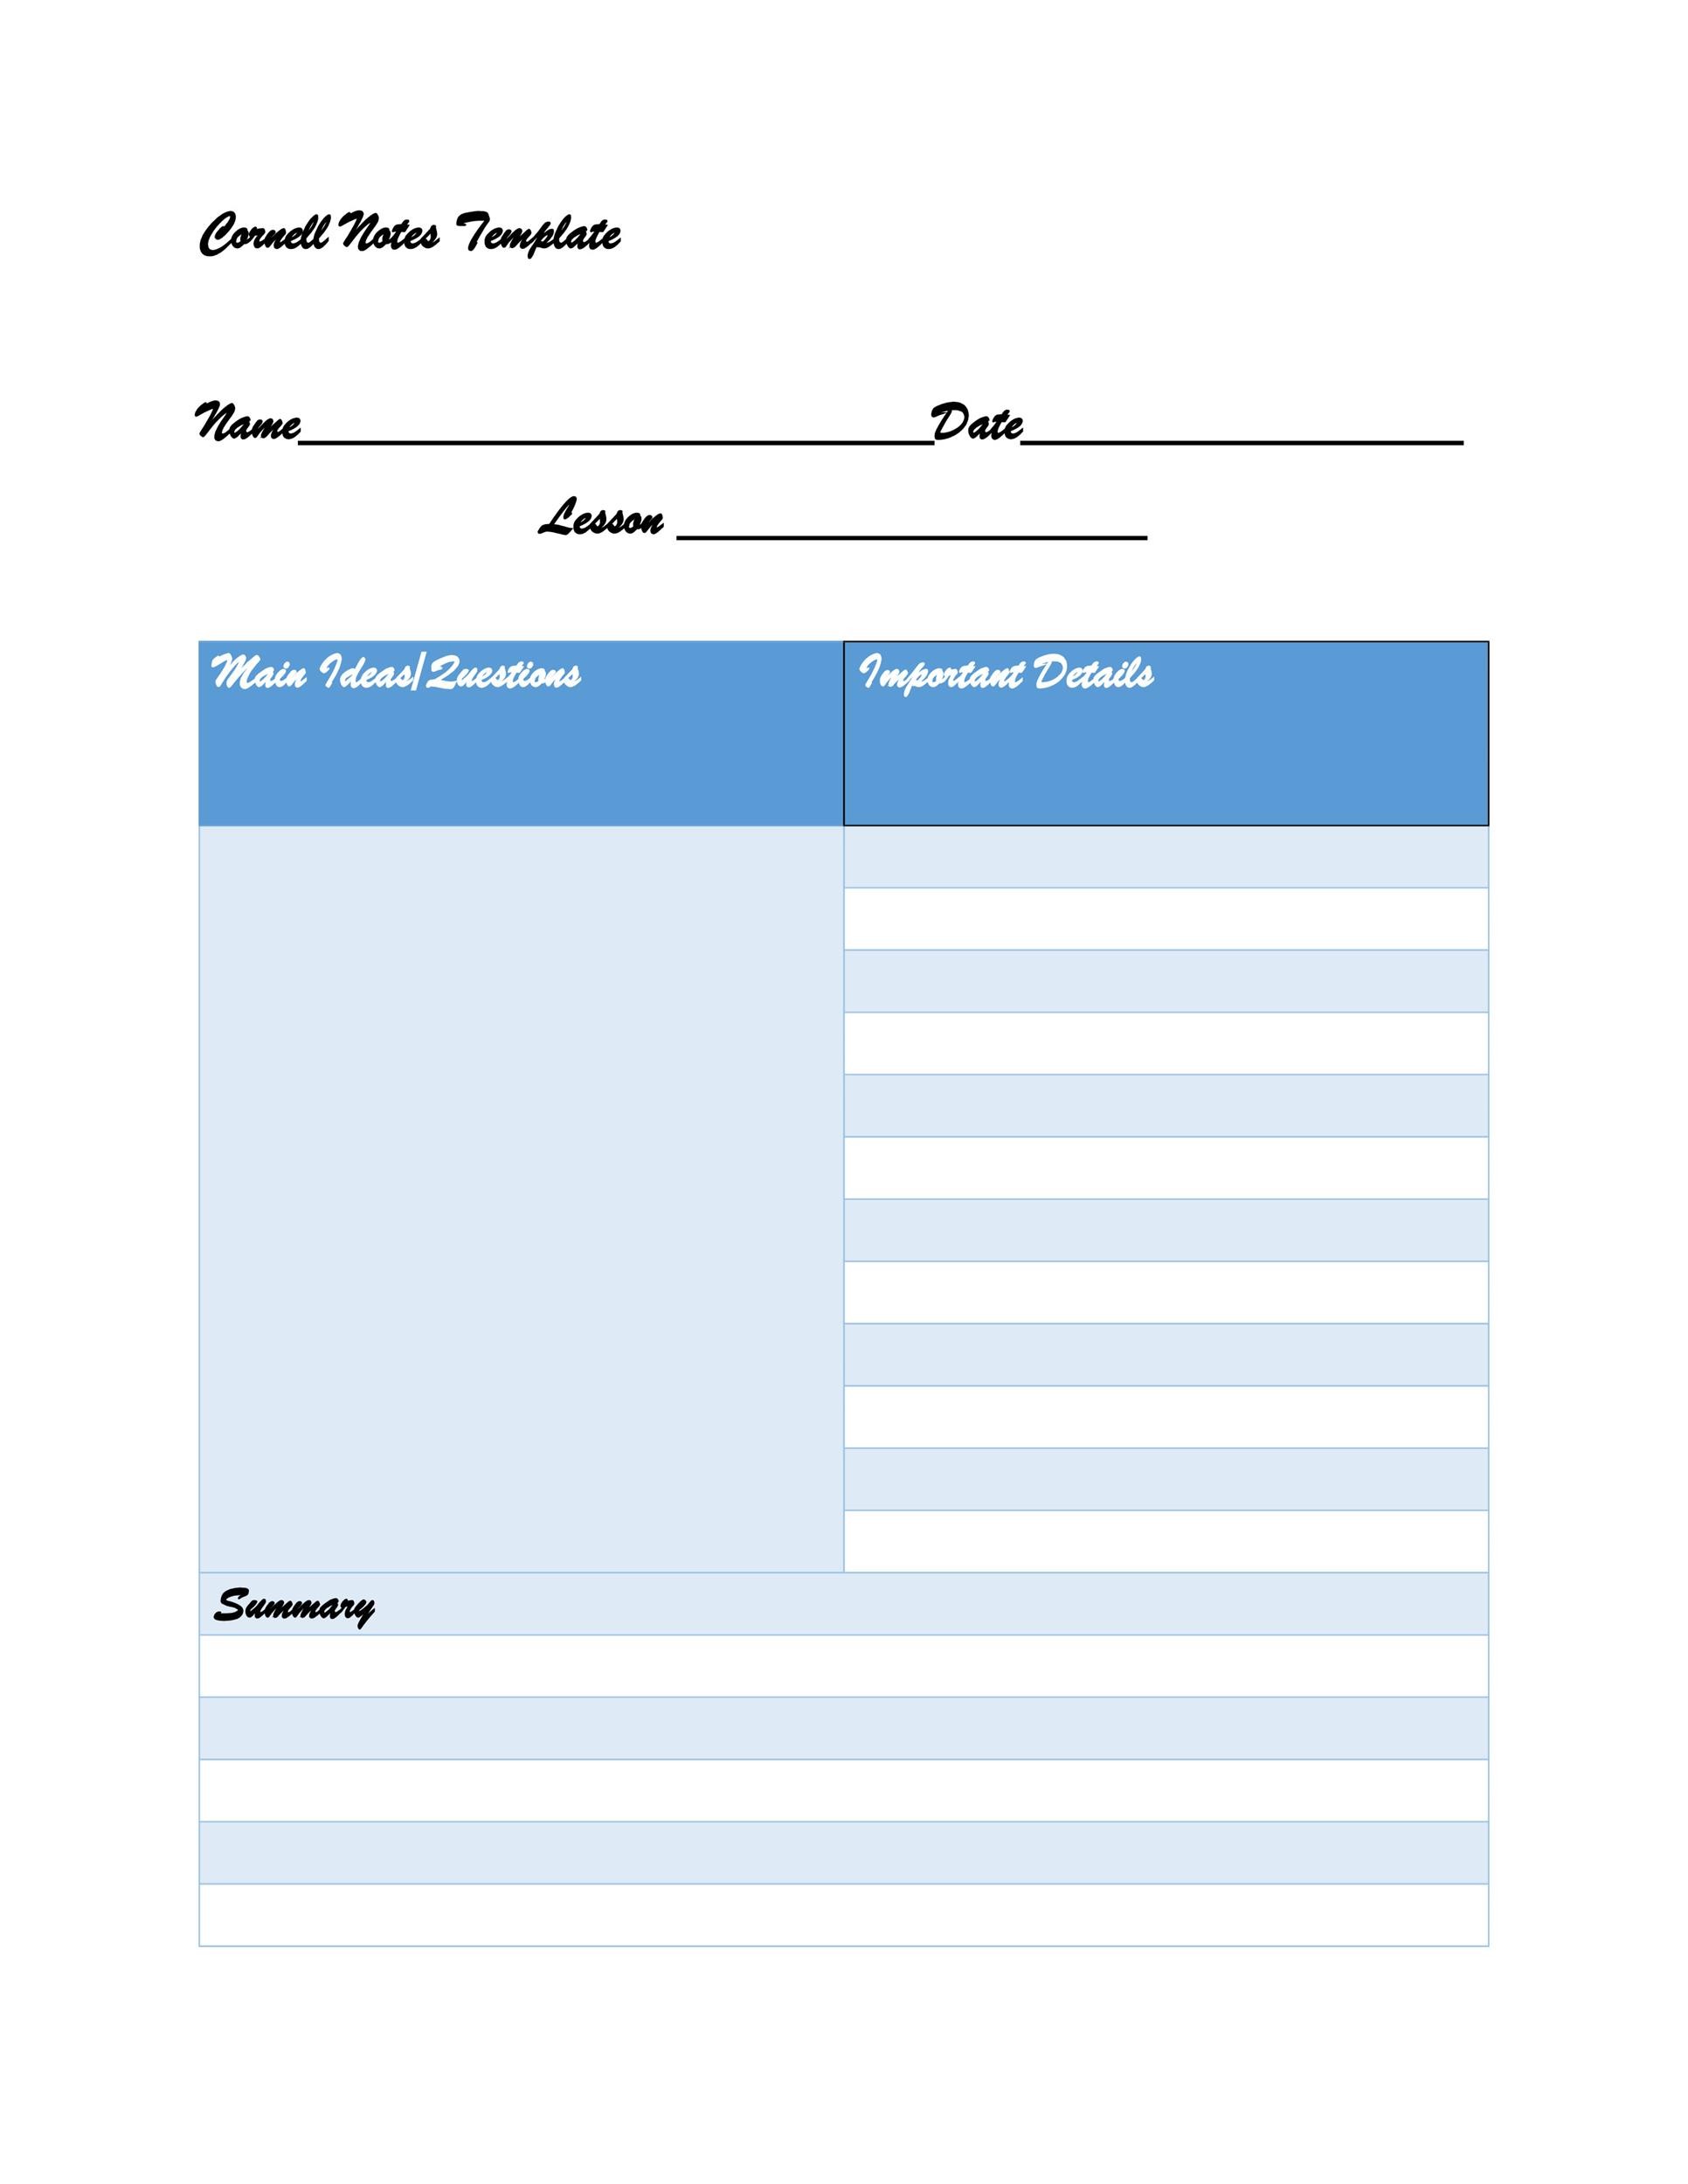 Free Cornell Notes Template 34